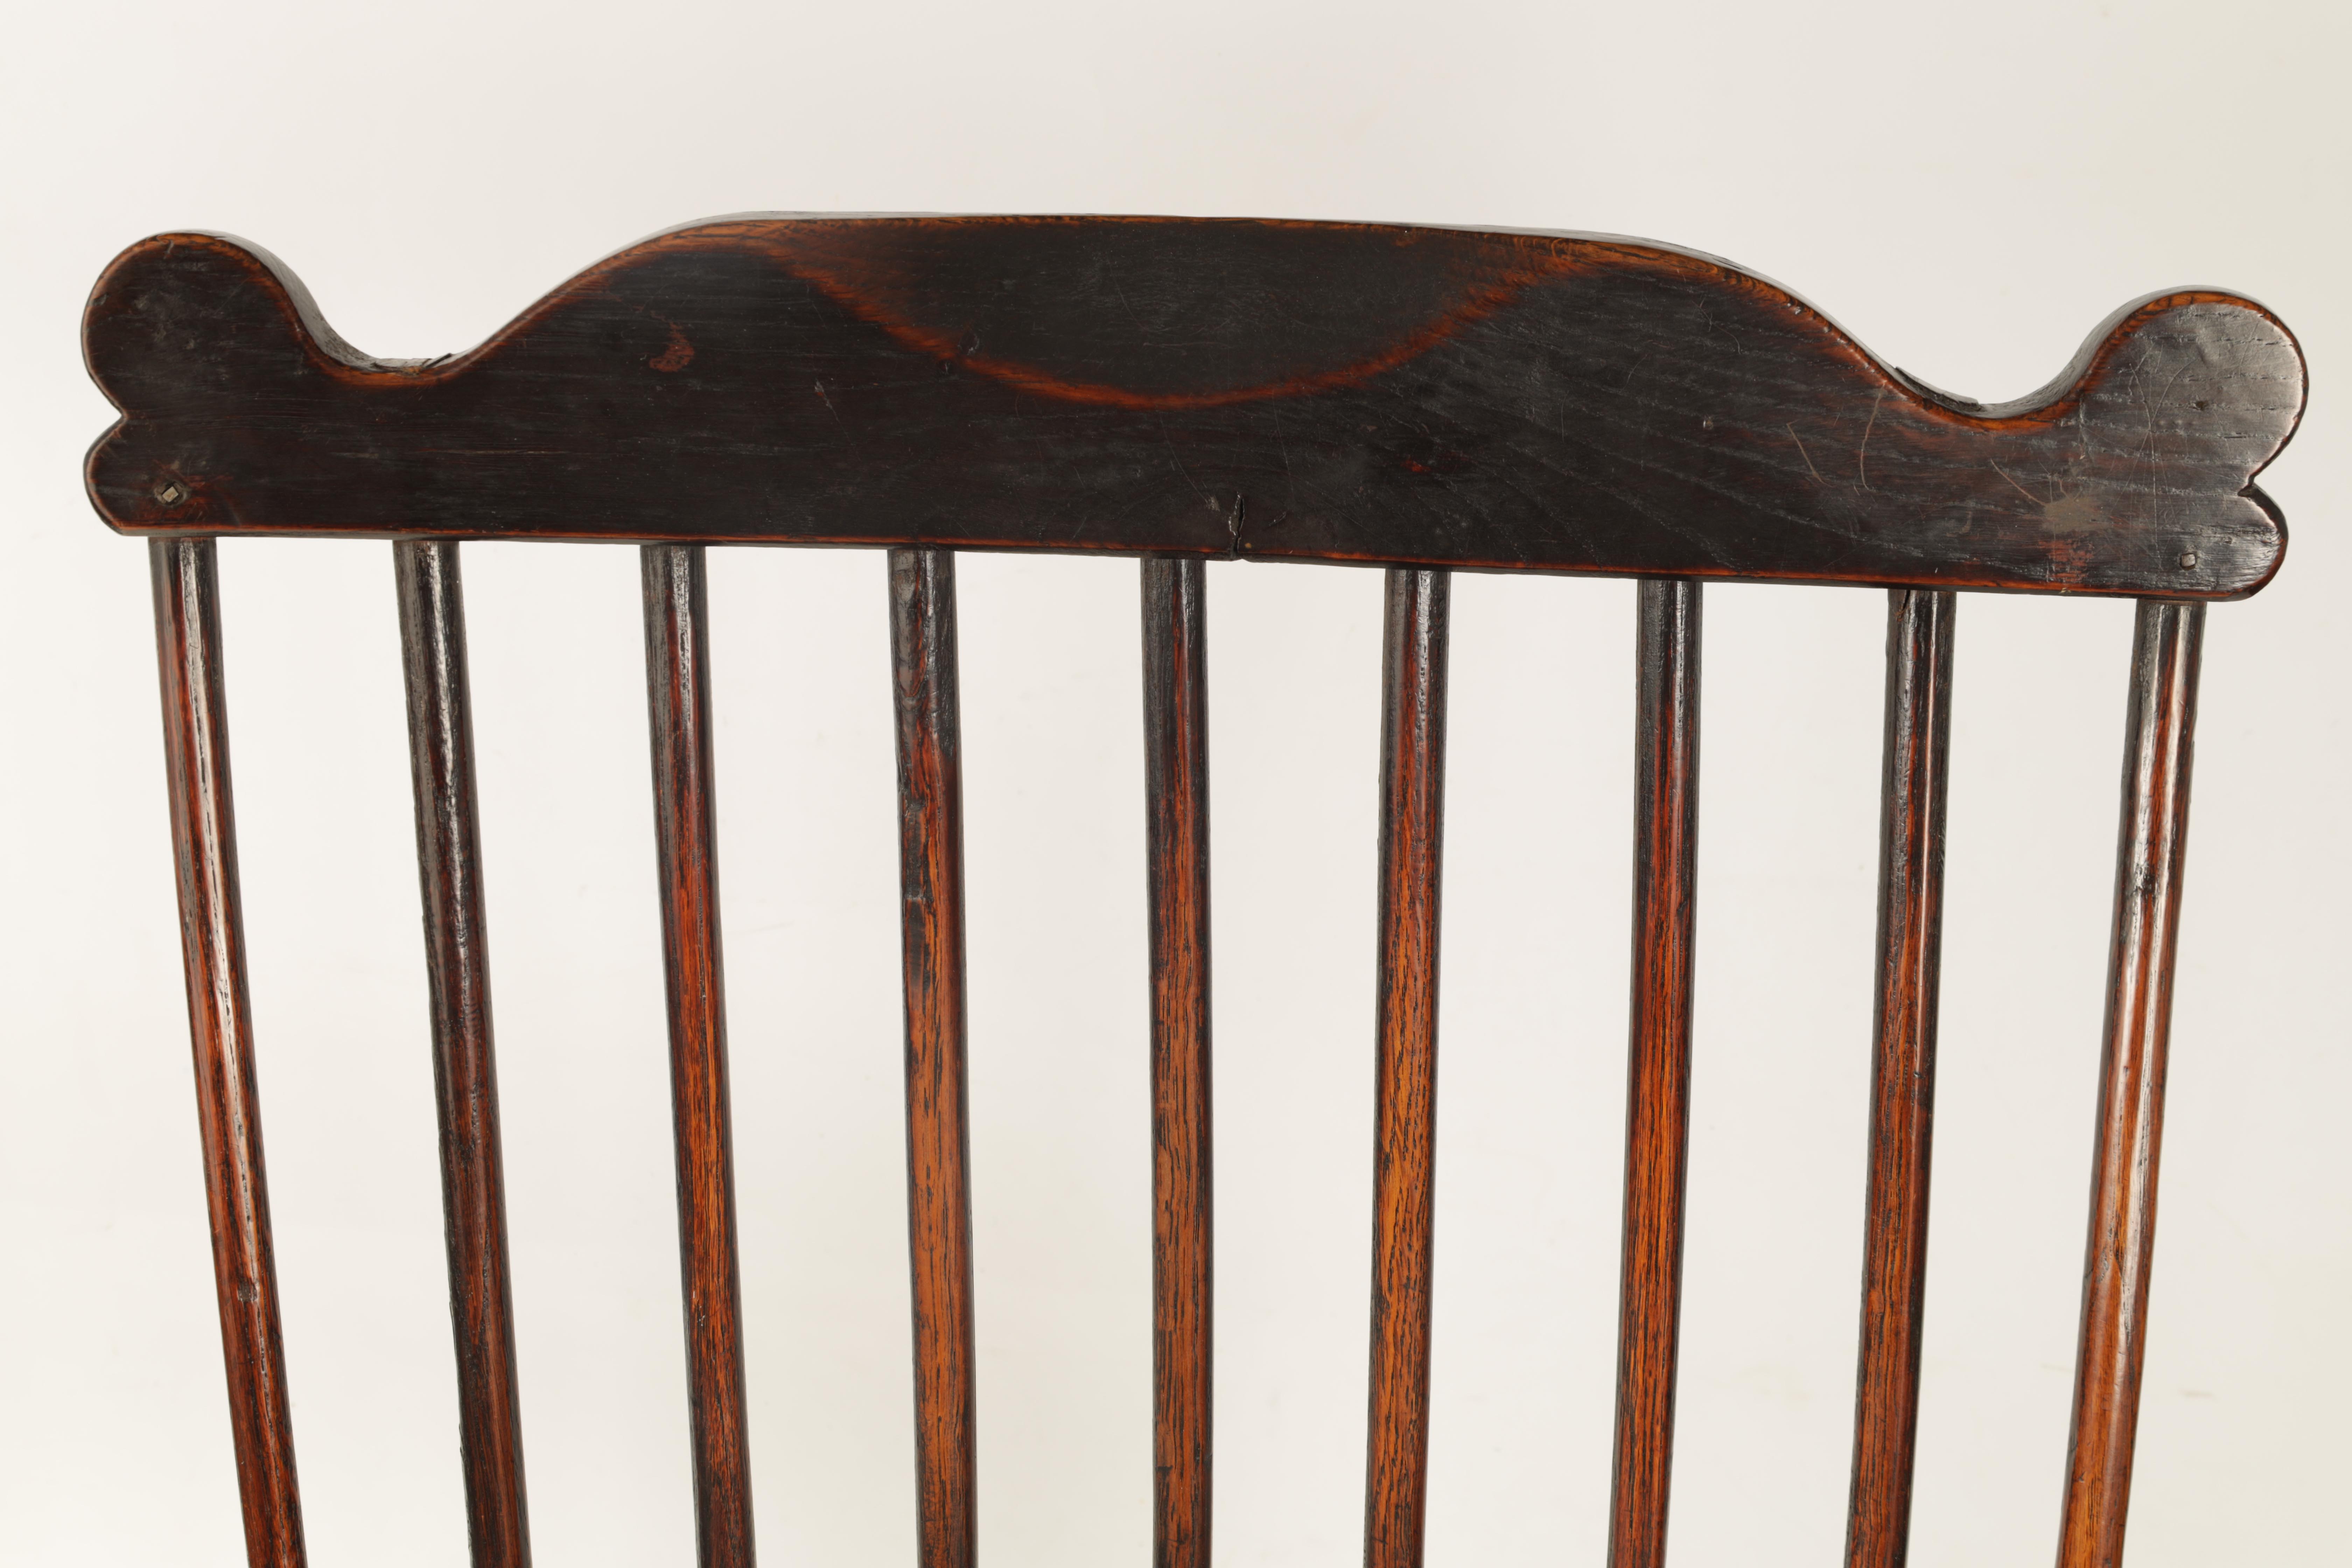 A GOOD 18TH CENTURY THAMES VALLEY OAK AND ELM WINDSOR CHAIR with shaped top rail and flared arms, - Image 6 of 11